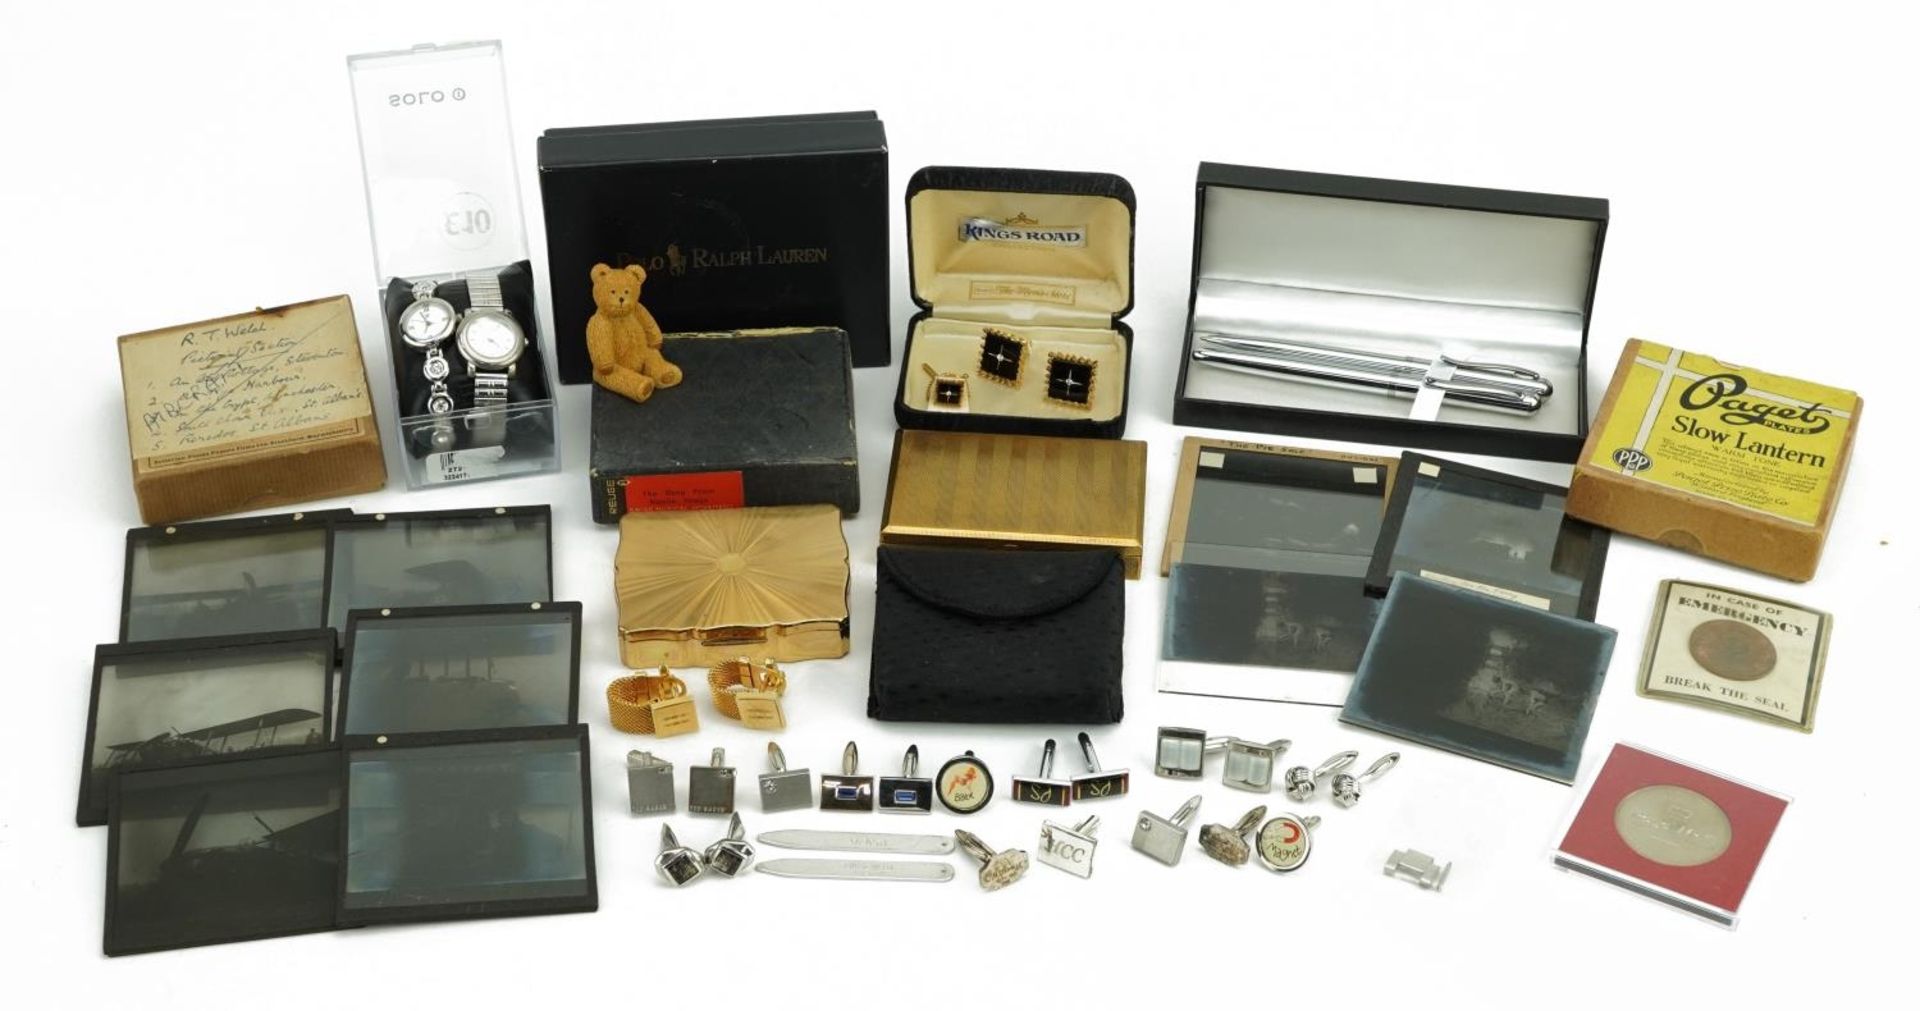 Sundry items including pens, wristwatches, cufflinks and Reuge Stratton compact : For further